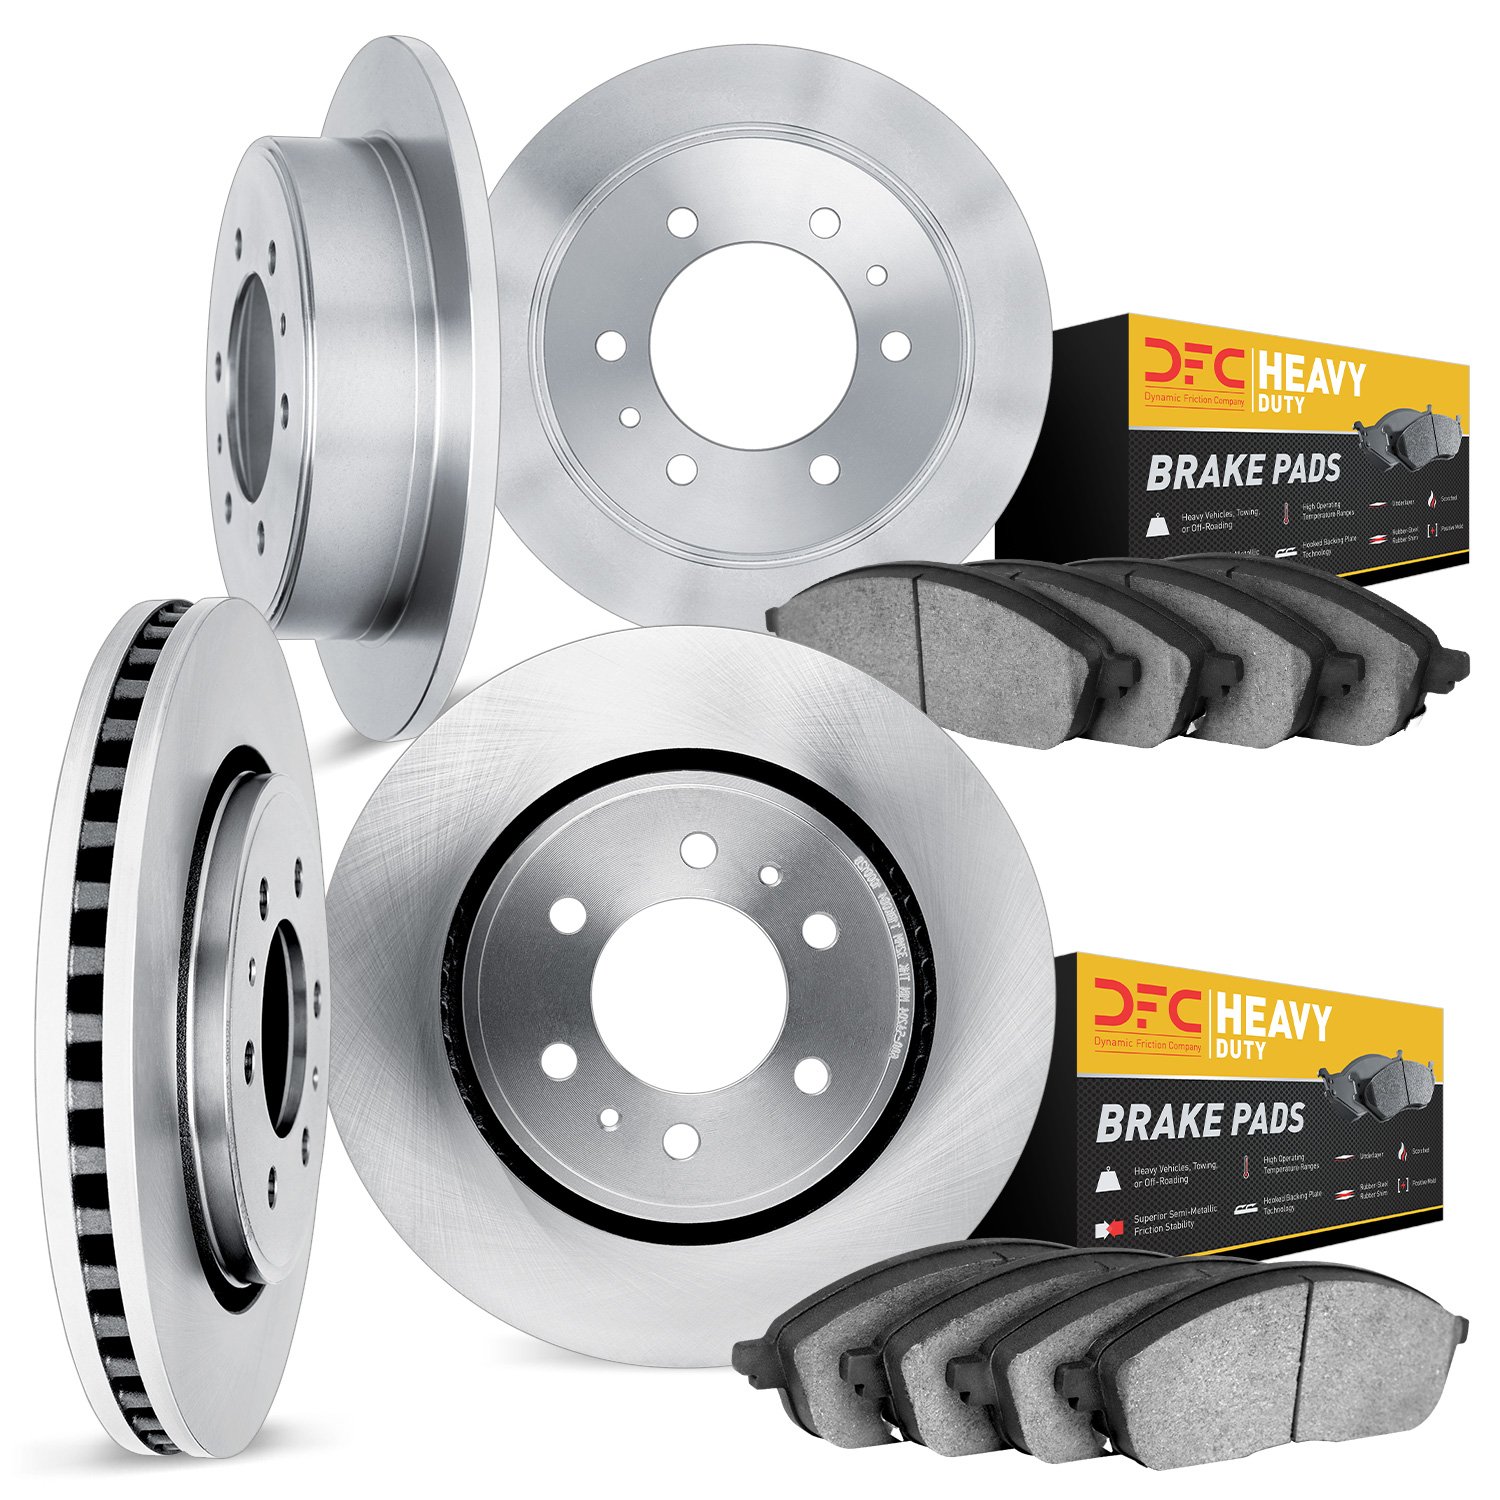 6204-40657 Brake Rotors w/Heavy-Duty Brake Pads Kit, Fits Select Multiple Makes/Models, Position: Front and Rear